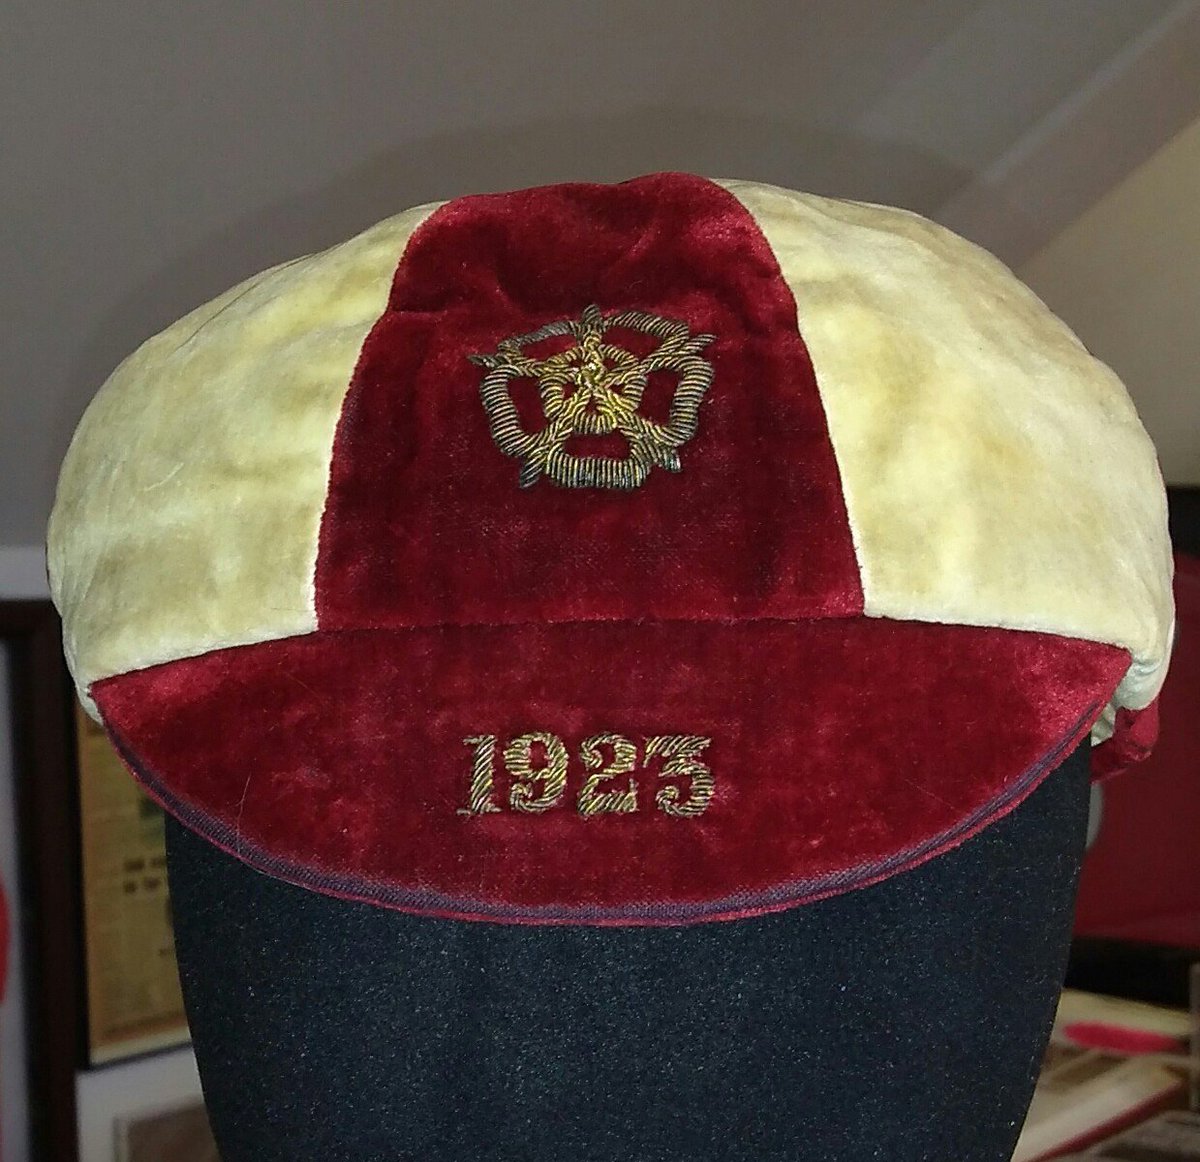 The first @England cap won by a Charlton player; Seth Plum in 1923 Purchased for £1200 from funds raised by donations and sales, it is now on permanant display in the museum Happy St George's Day #cafc